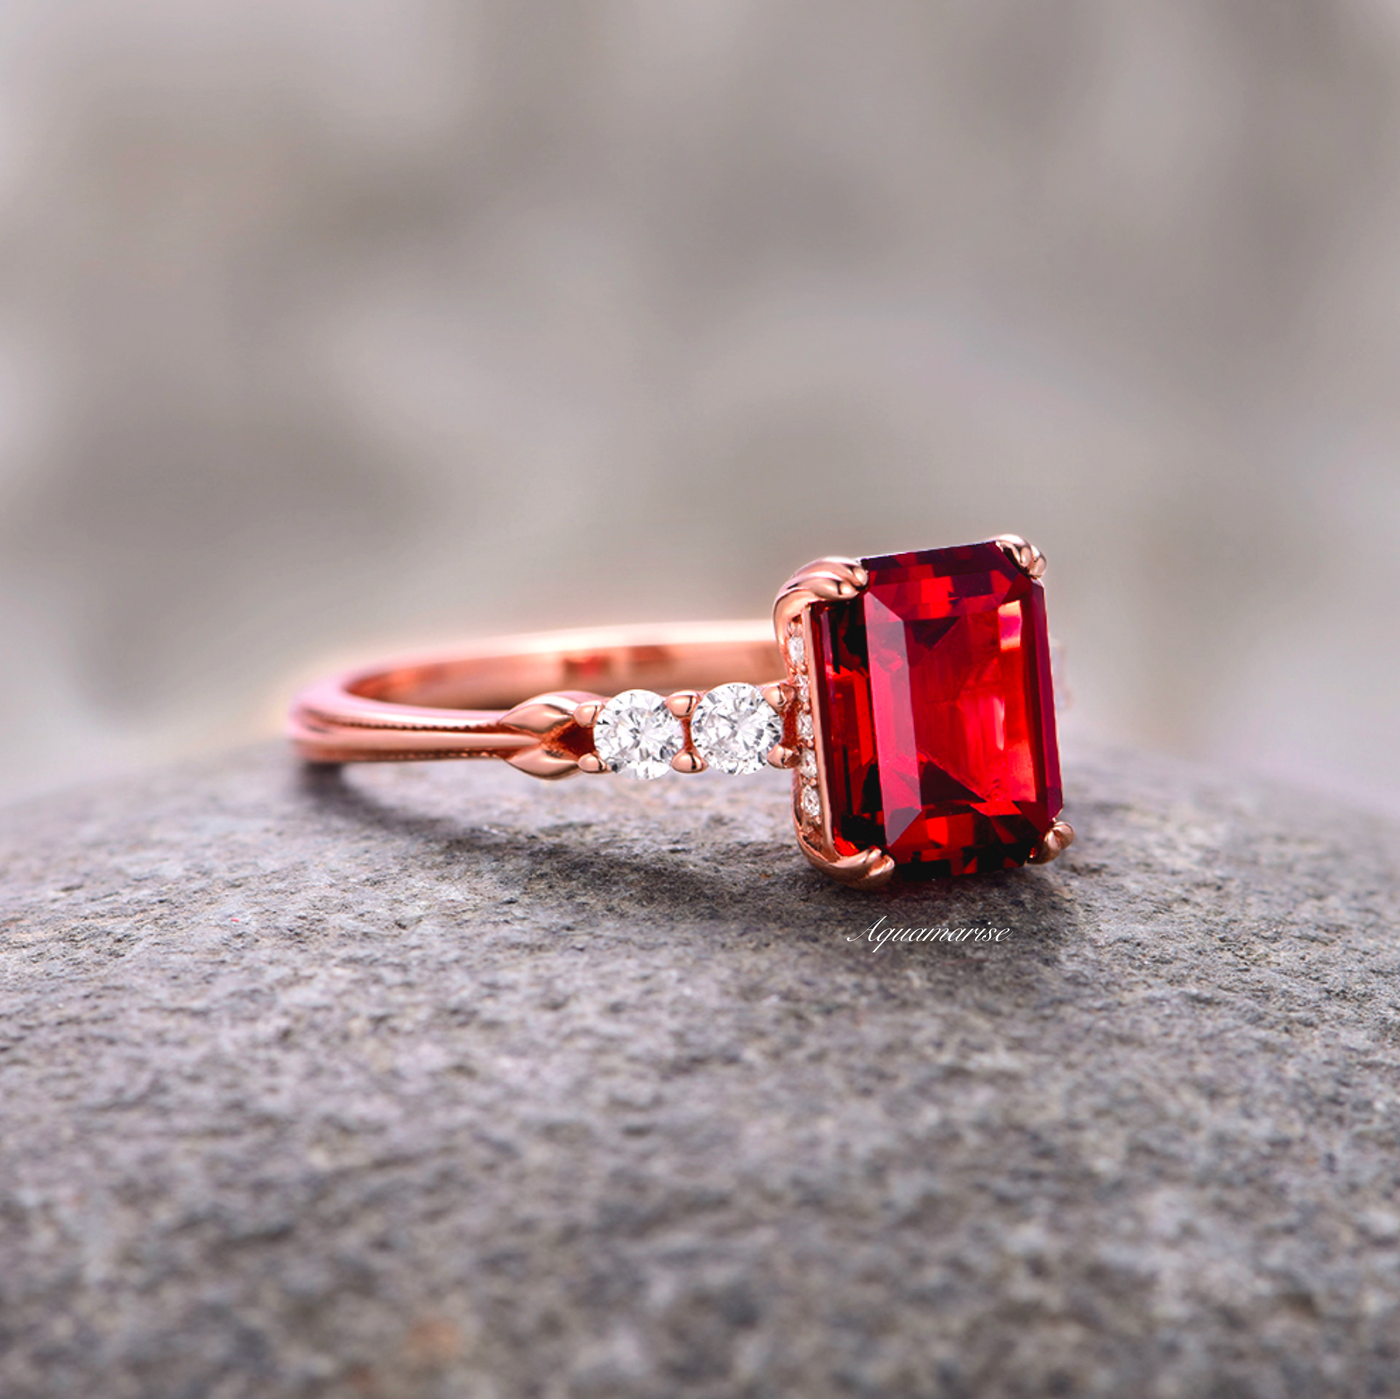 Natural Red Garnet Engagement Ring For Women- 14K Rose Gold Vermeil Emerald Cut Unique Red Garnet Promise Ring Anniversary Gift Idea For Her